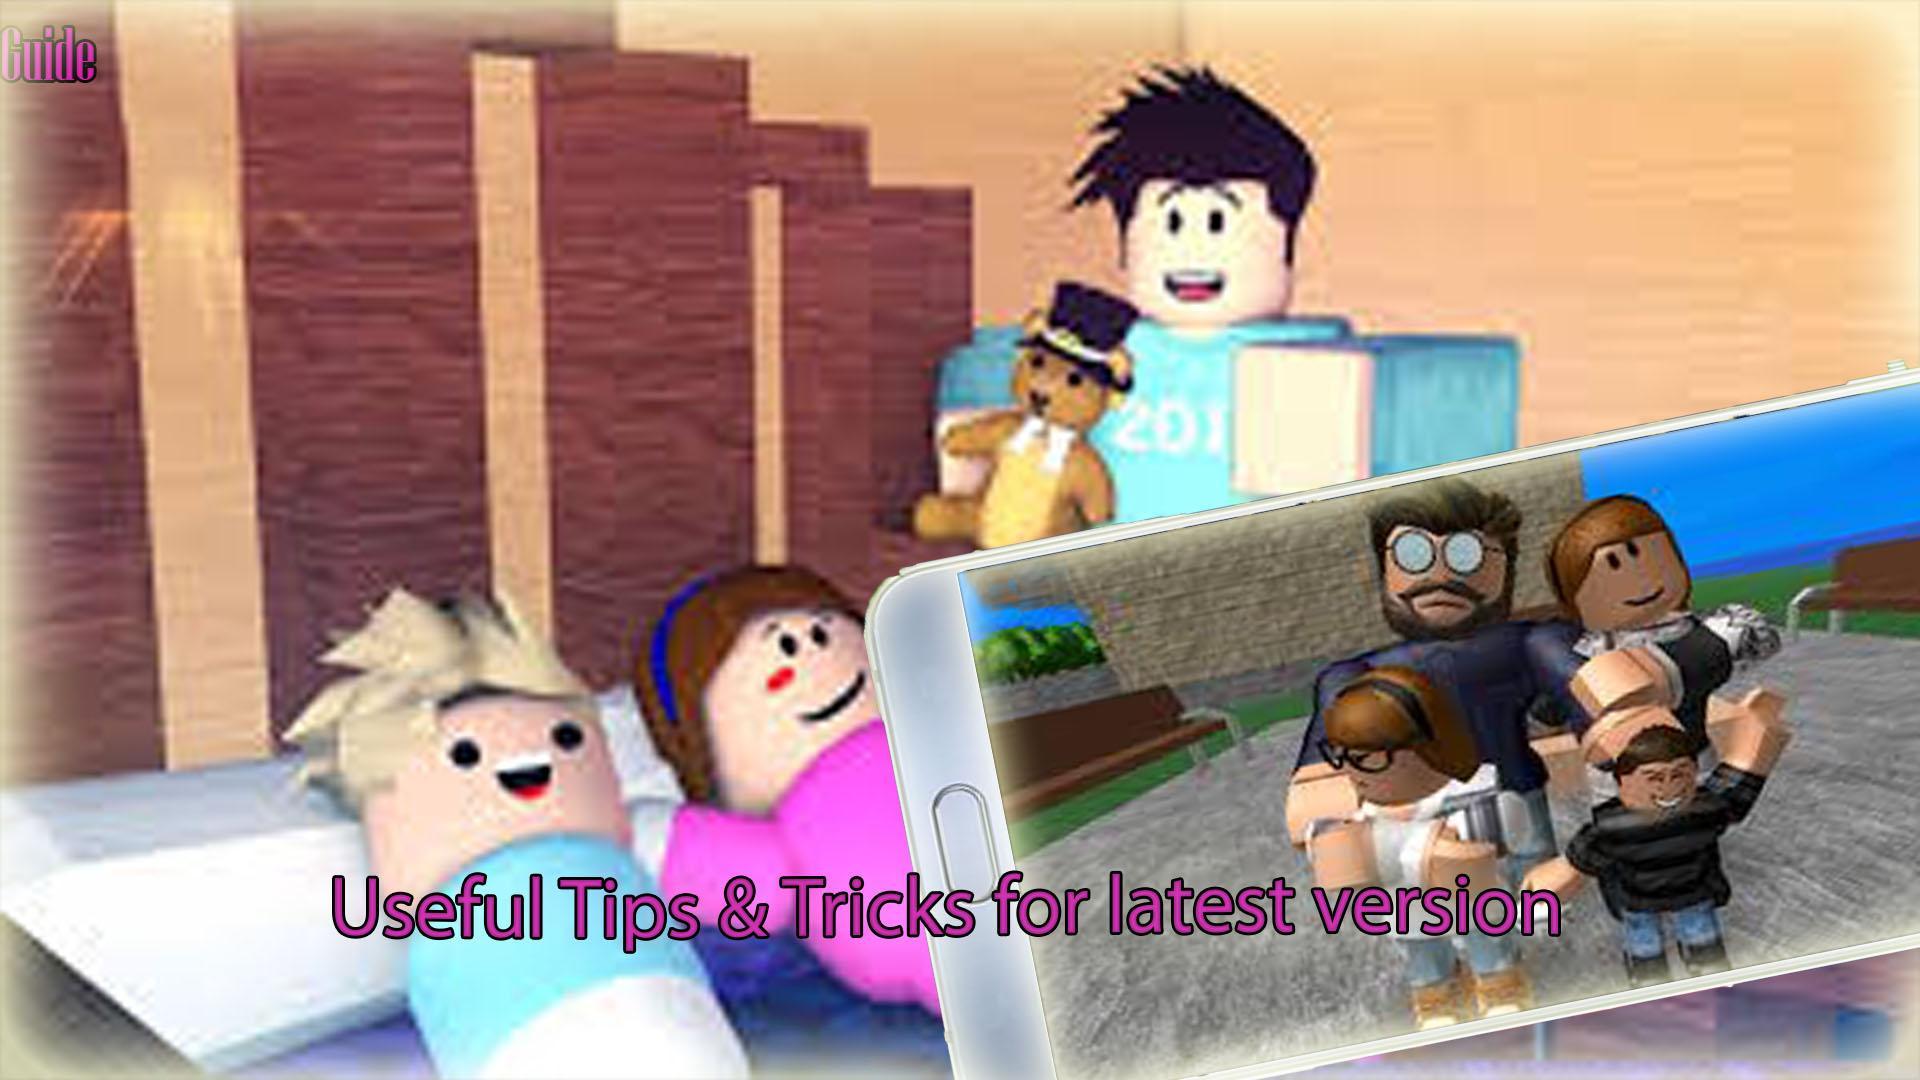 Tips Adopt Me Cute Baby Kid Roblox For Parents For Android Apk Download - app insights raising cute baby in roblox adopt me apptopia